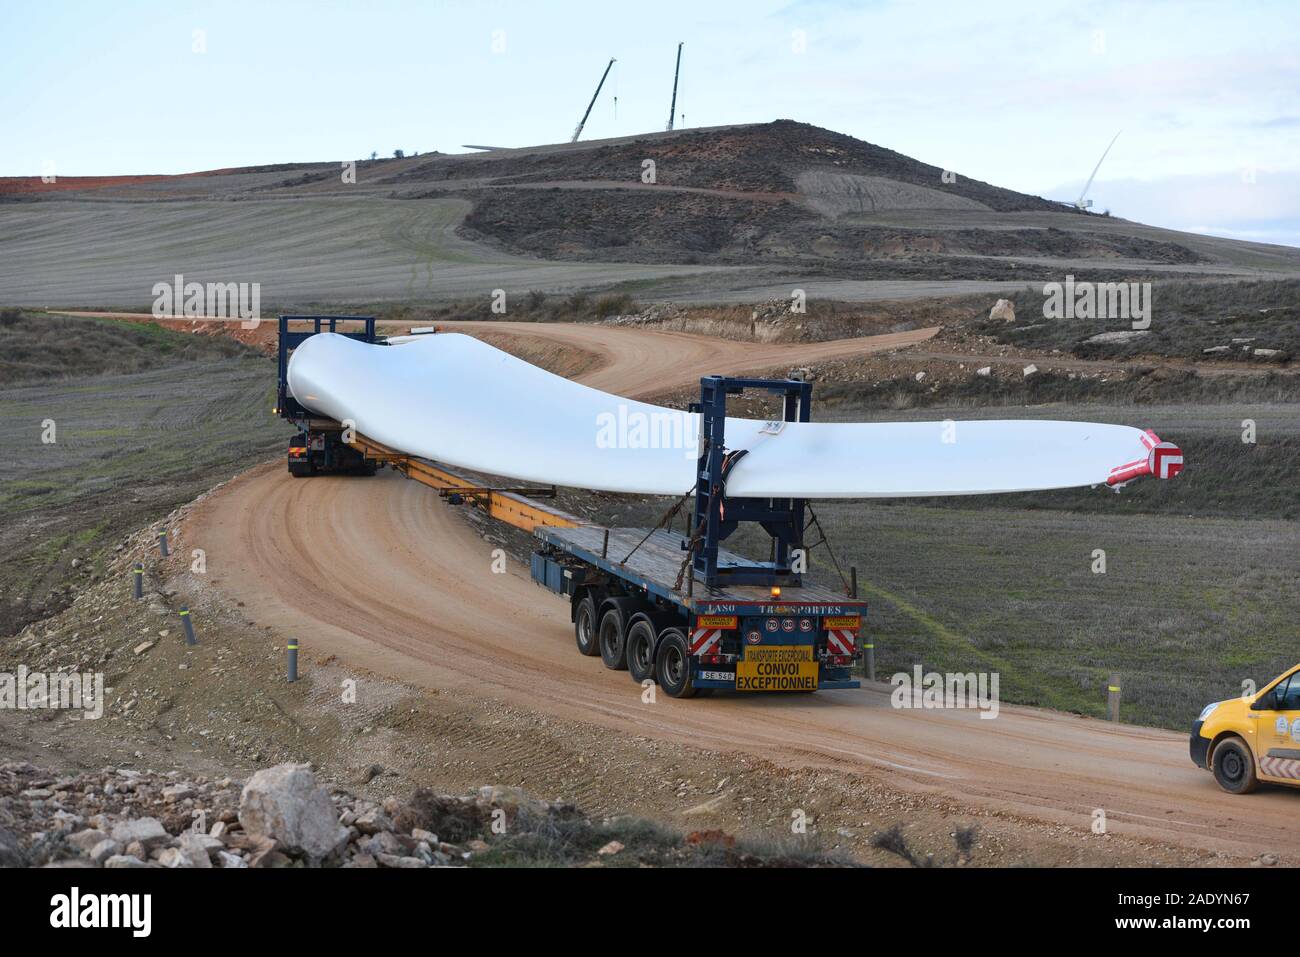 Madrid, Spain. 5th Dec, 2019. Special transport truck is seen transporting  the blade of a wind turbine near the small village of Beltejar.Construction  work continues on a new wind farm in Beltejar,